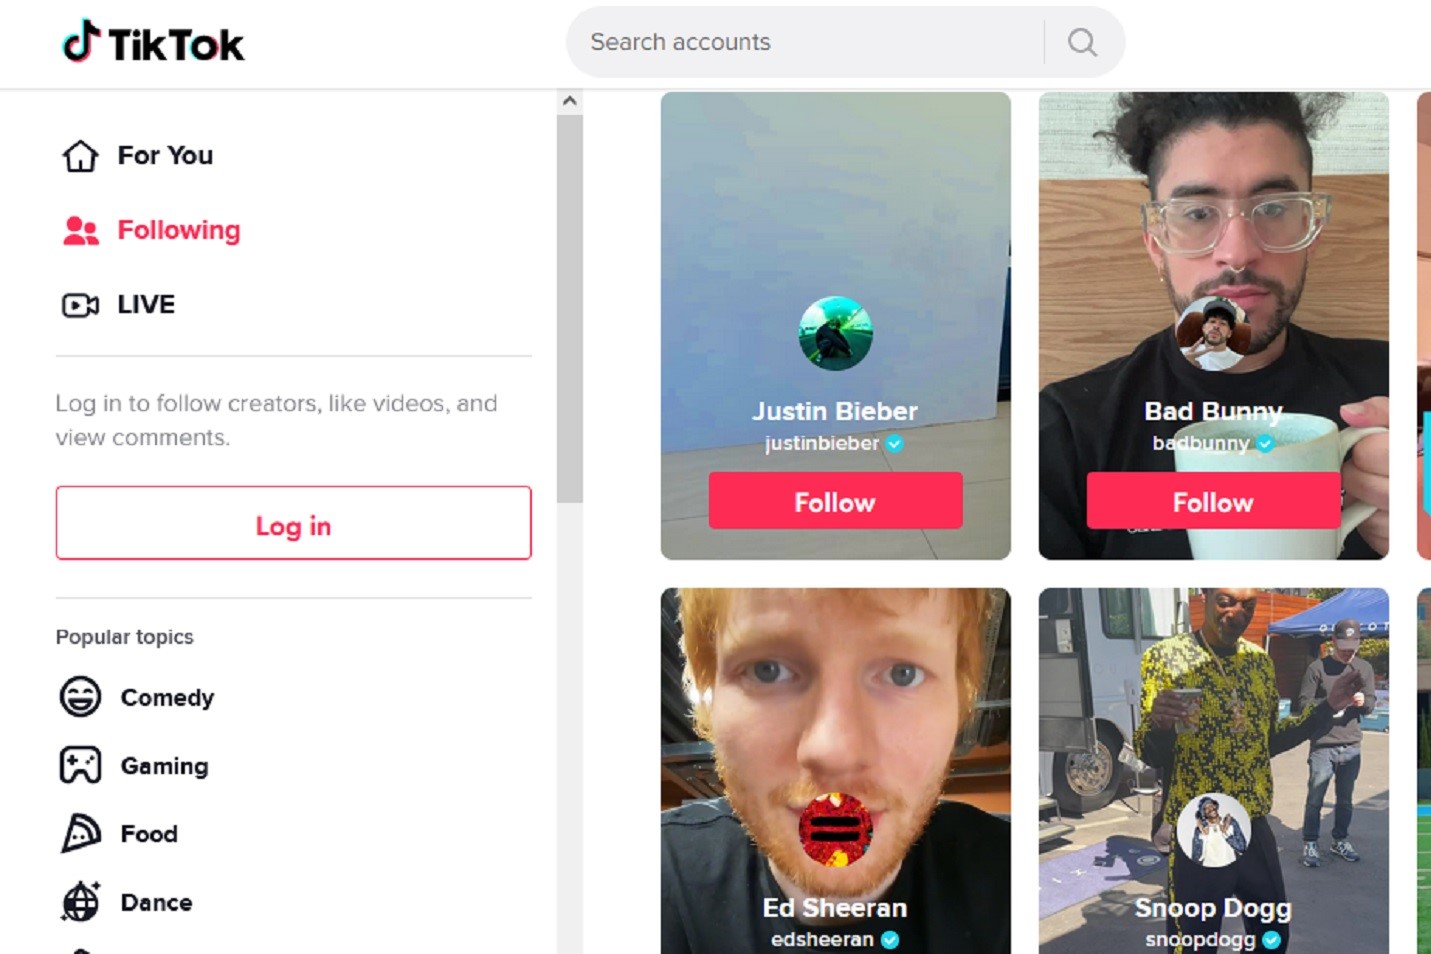 How to Get Verified on TikTok — It's Not so Simple